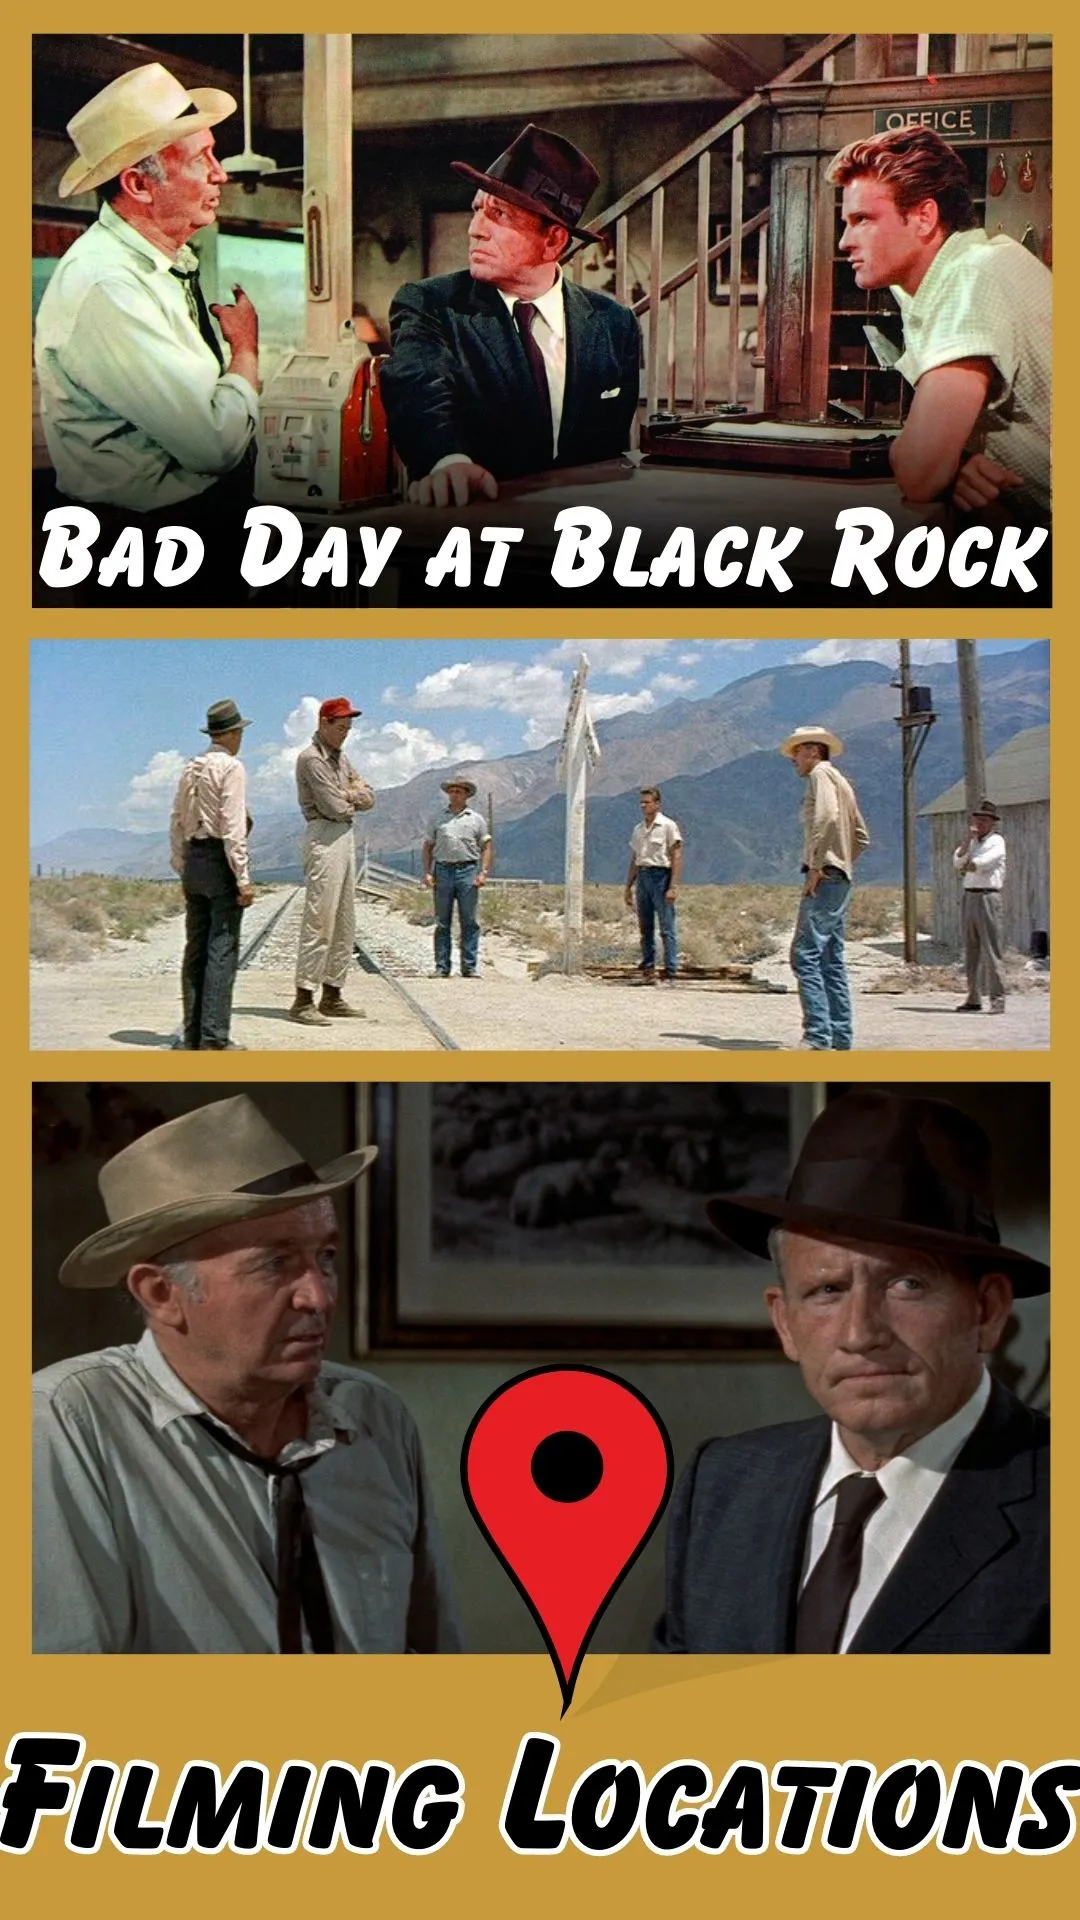 Bad Day at Black Rock Filming Locations